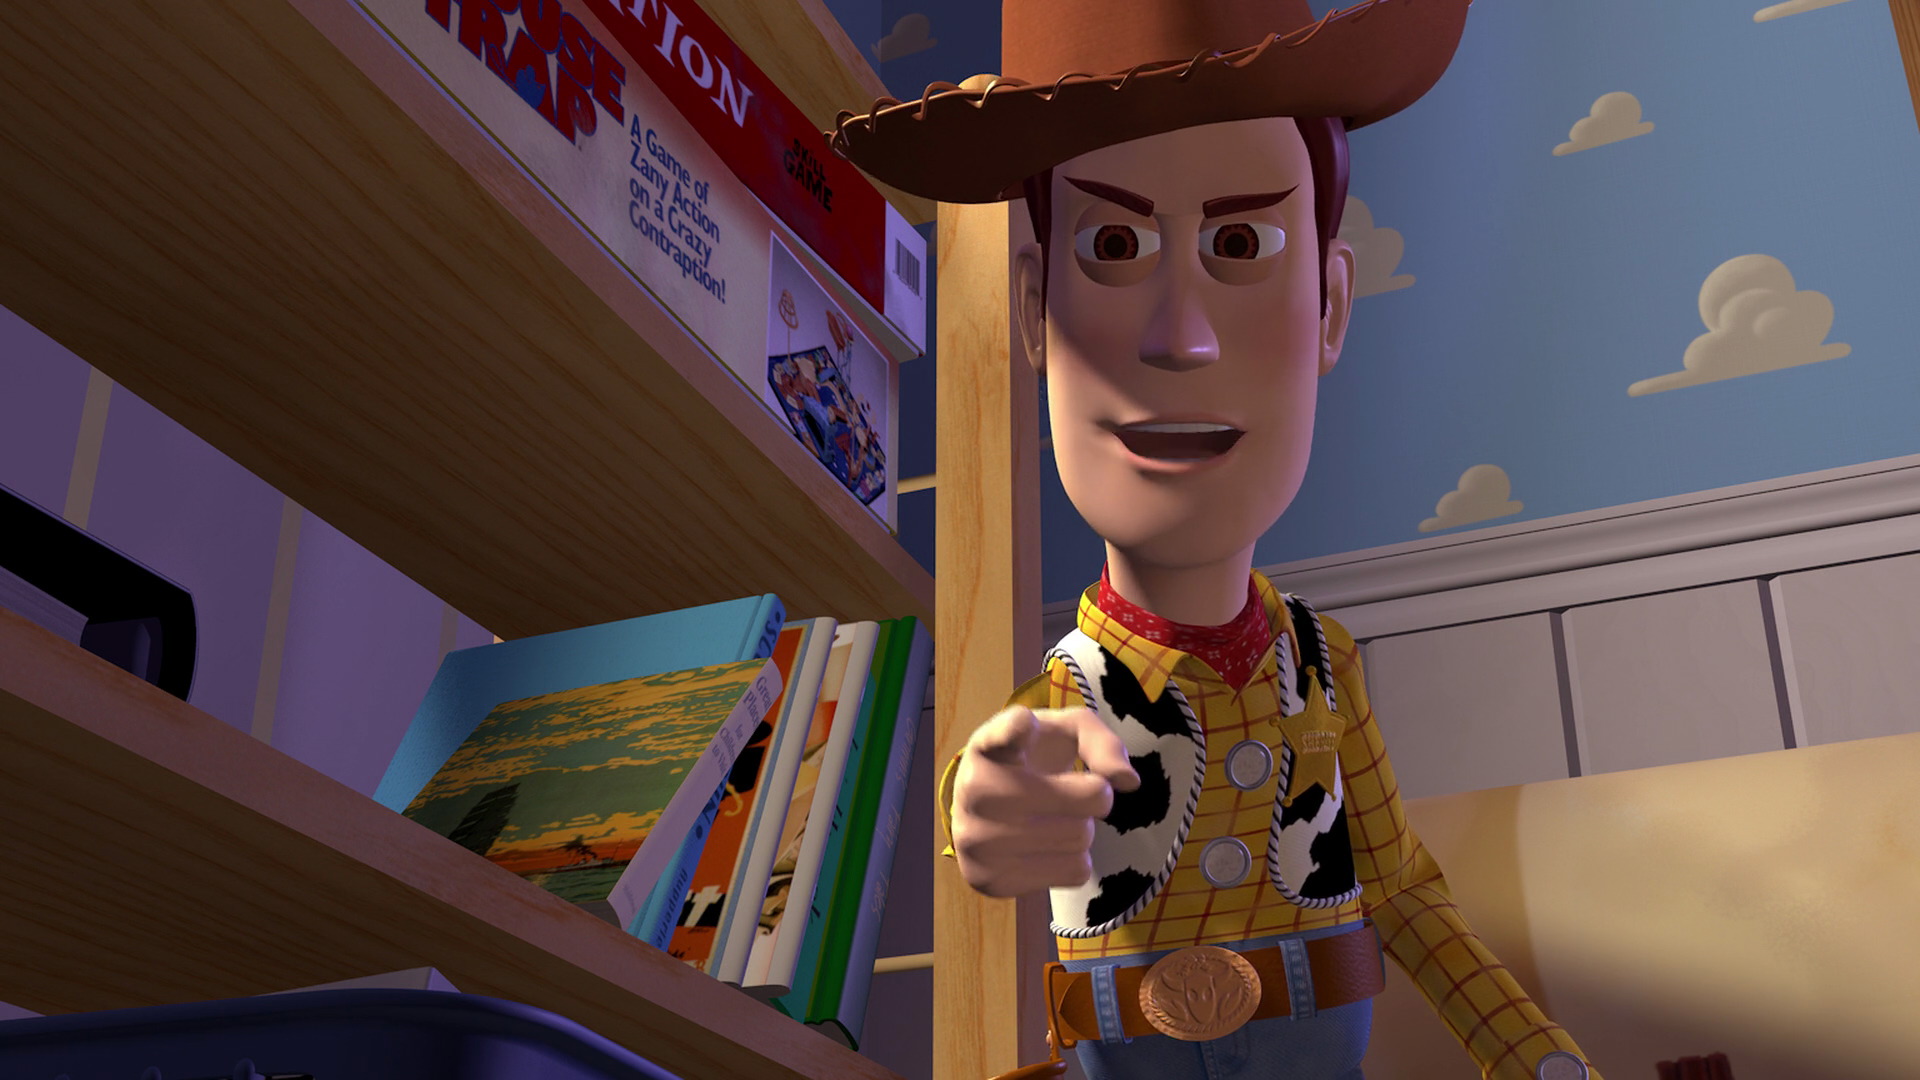 Not Just Movies: Toy Story 1 2 - armchaircblogspotcom